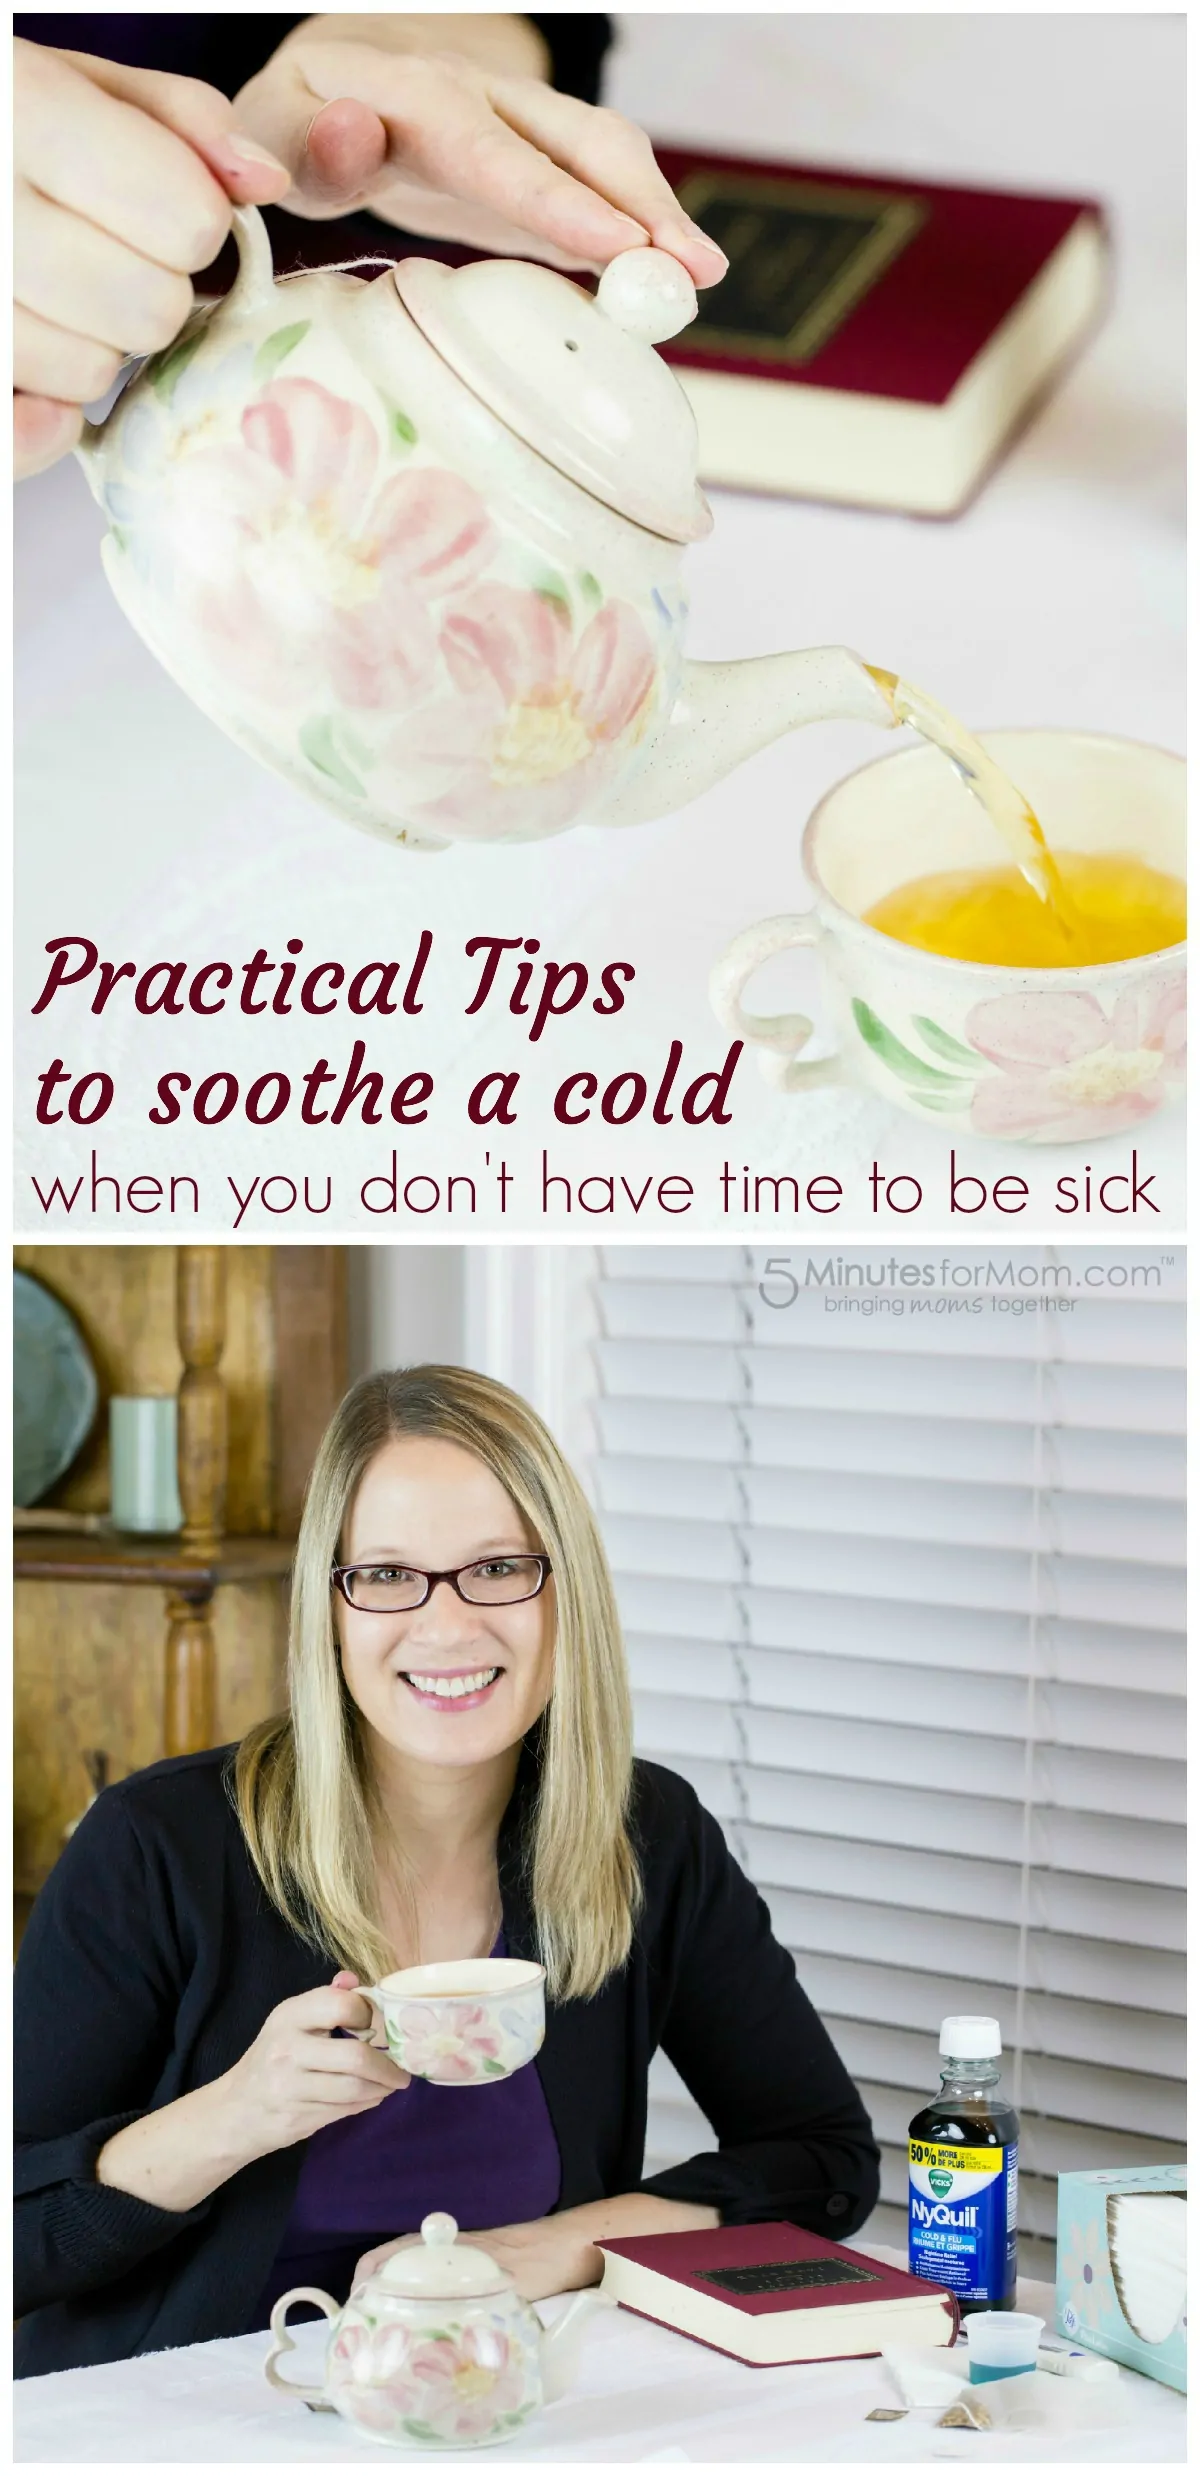 Practical tips to soothe a cold